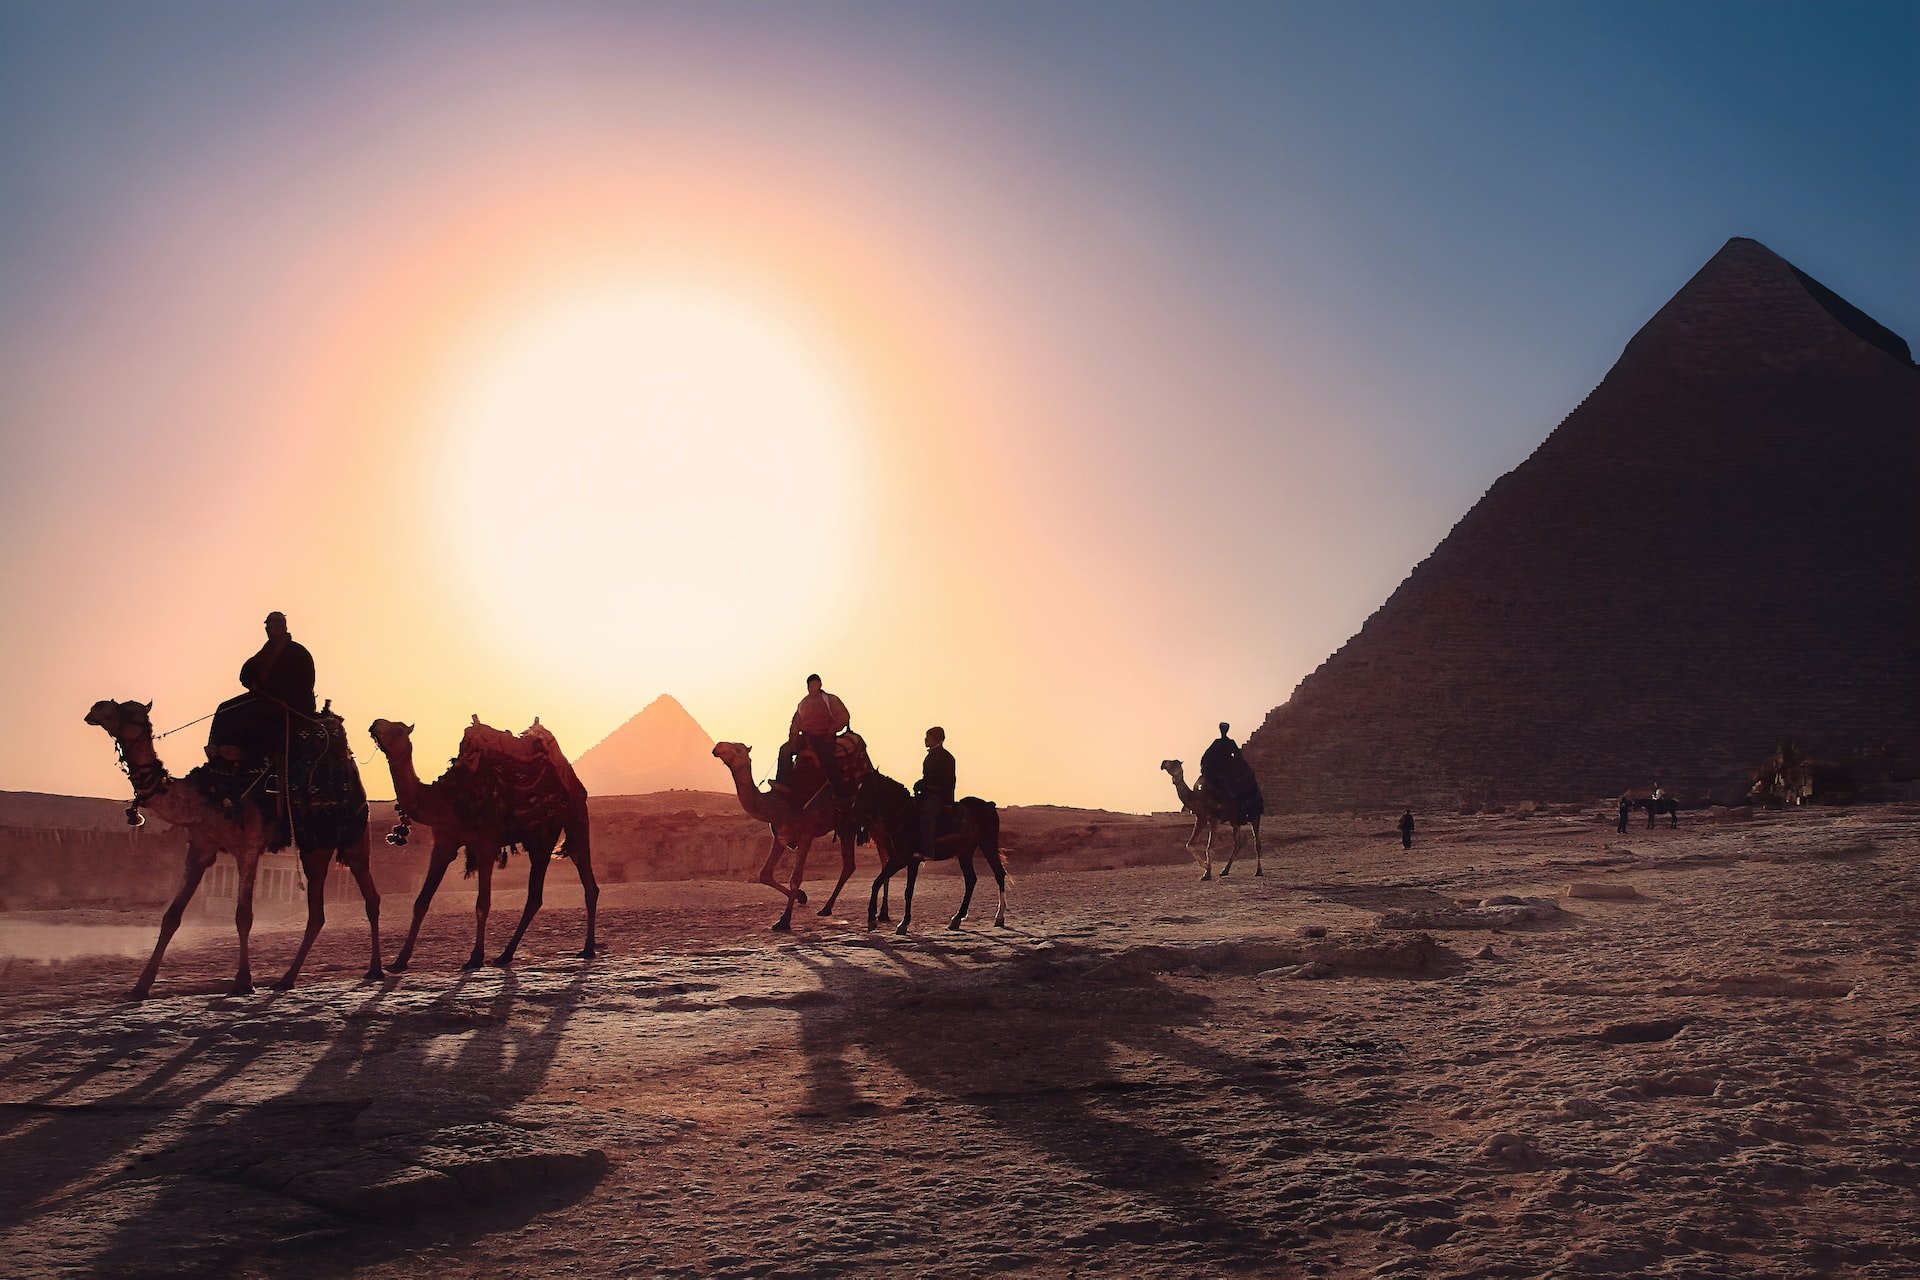 Egyptian Pyramids with Camel riders at night